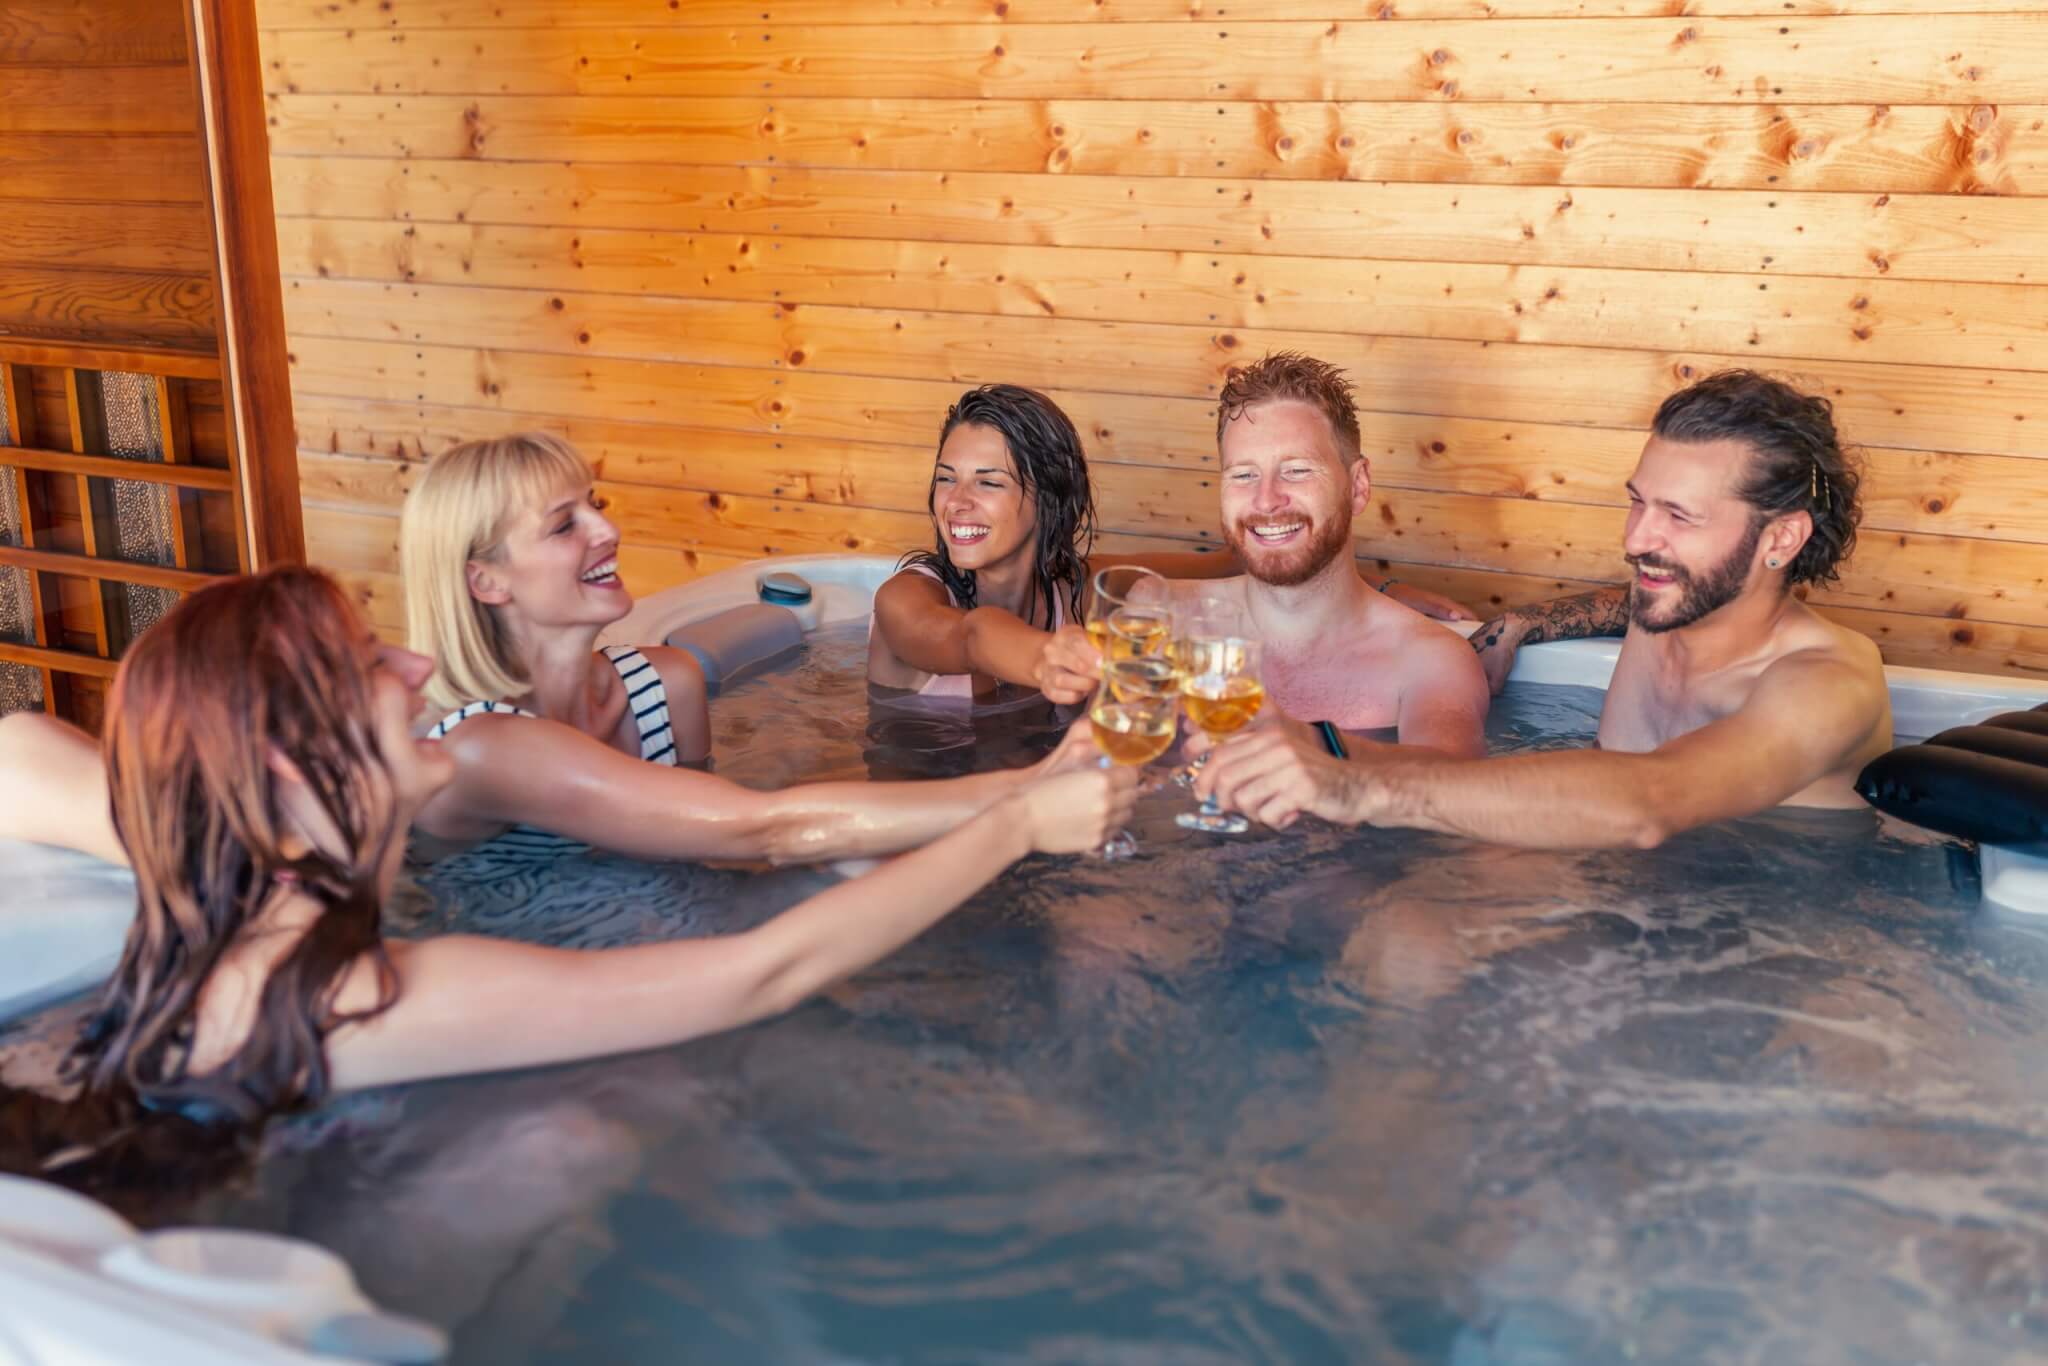 Just how gross are hot tubs? Depends how you about bathing in feces, urine fungi - Study Finds